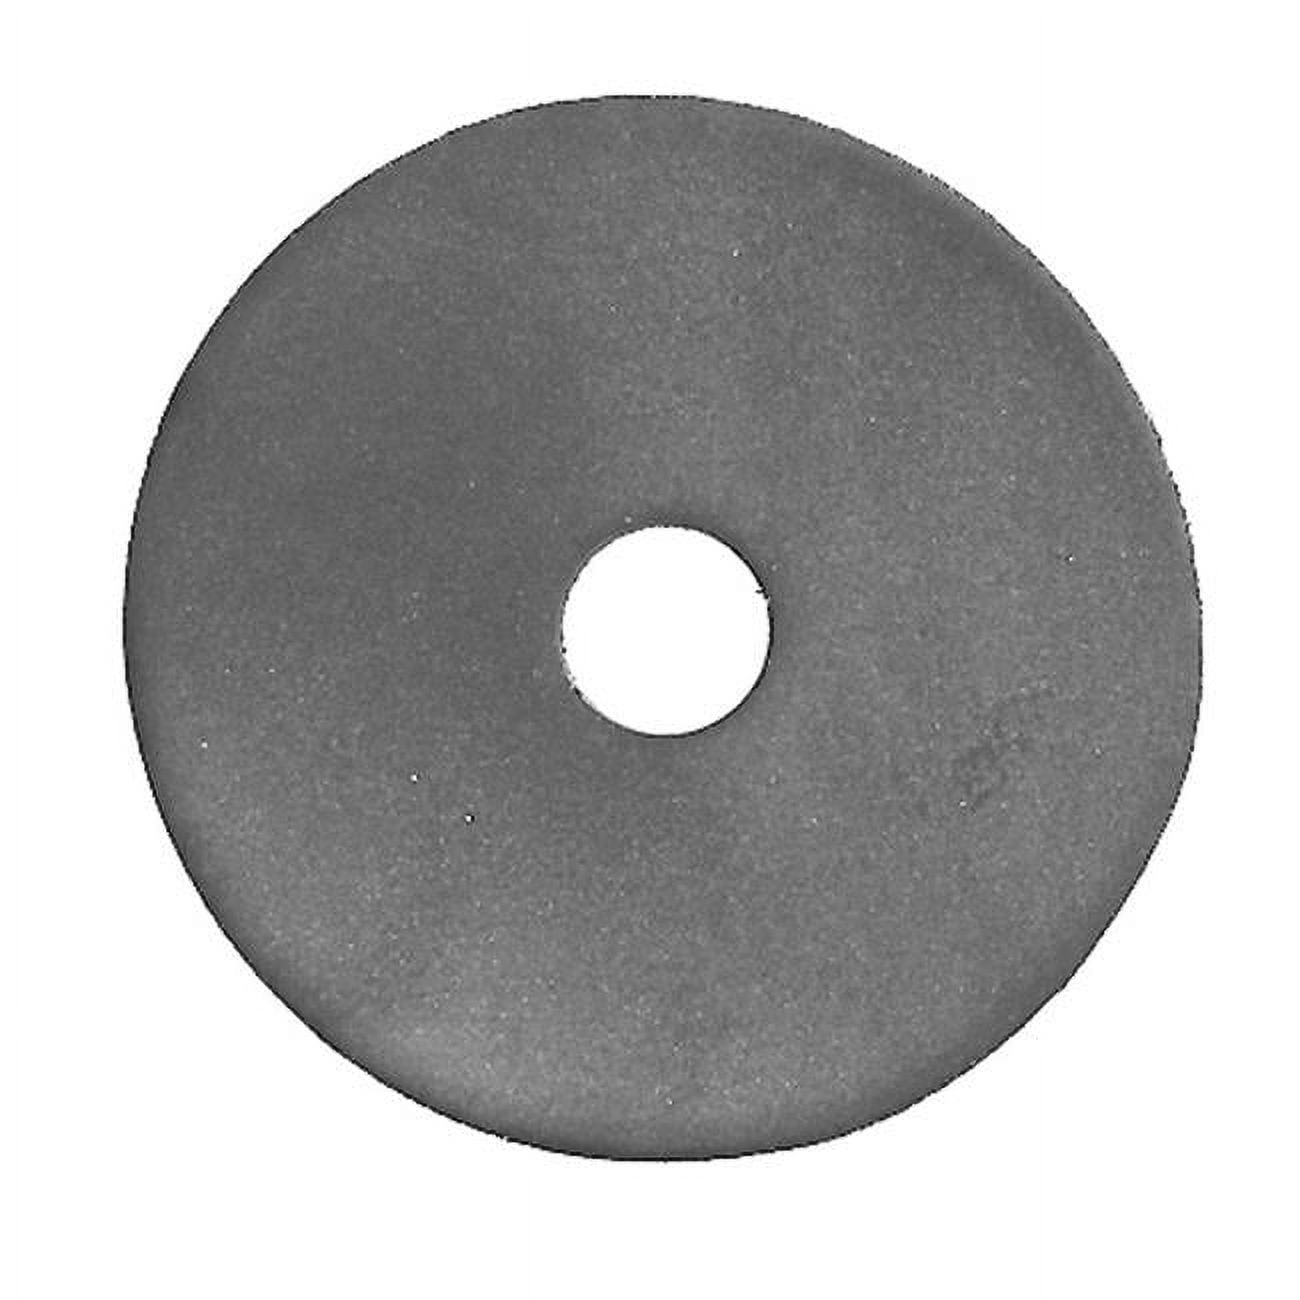 61805b 1.25 X 1.25 In. Rubber Flat Washer- Pack Of 5